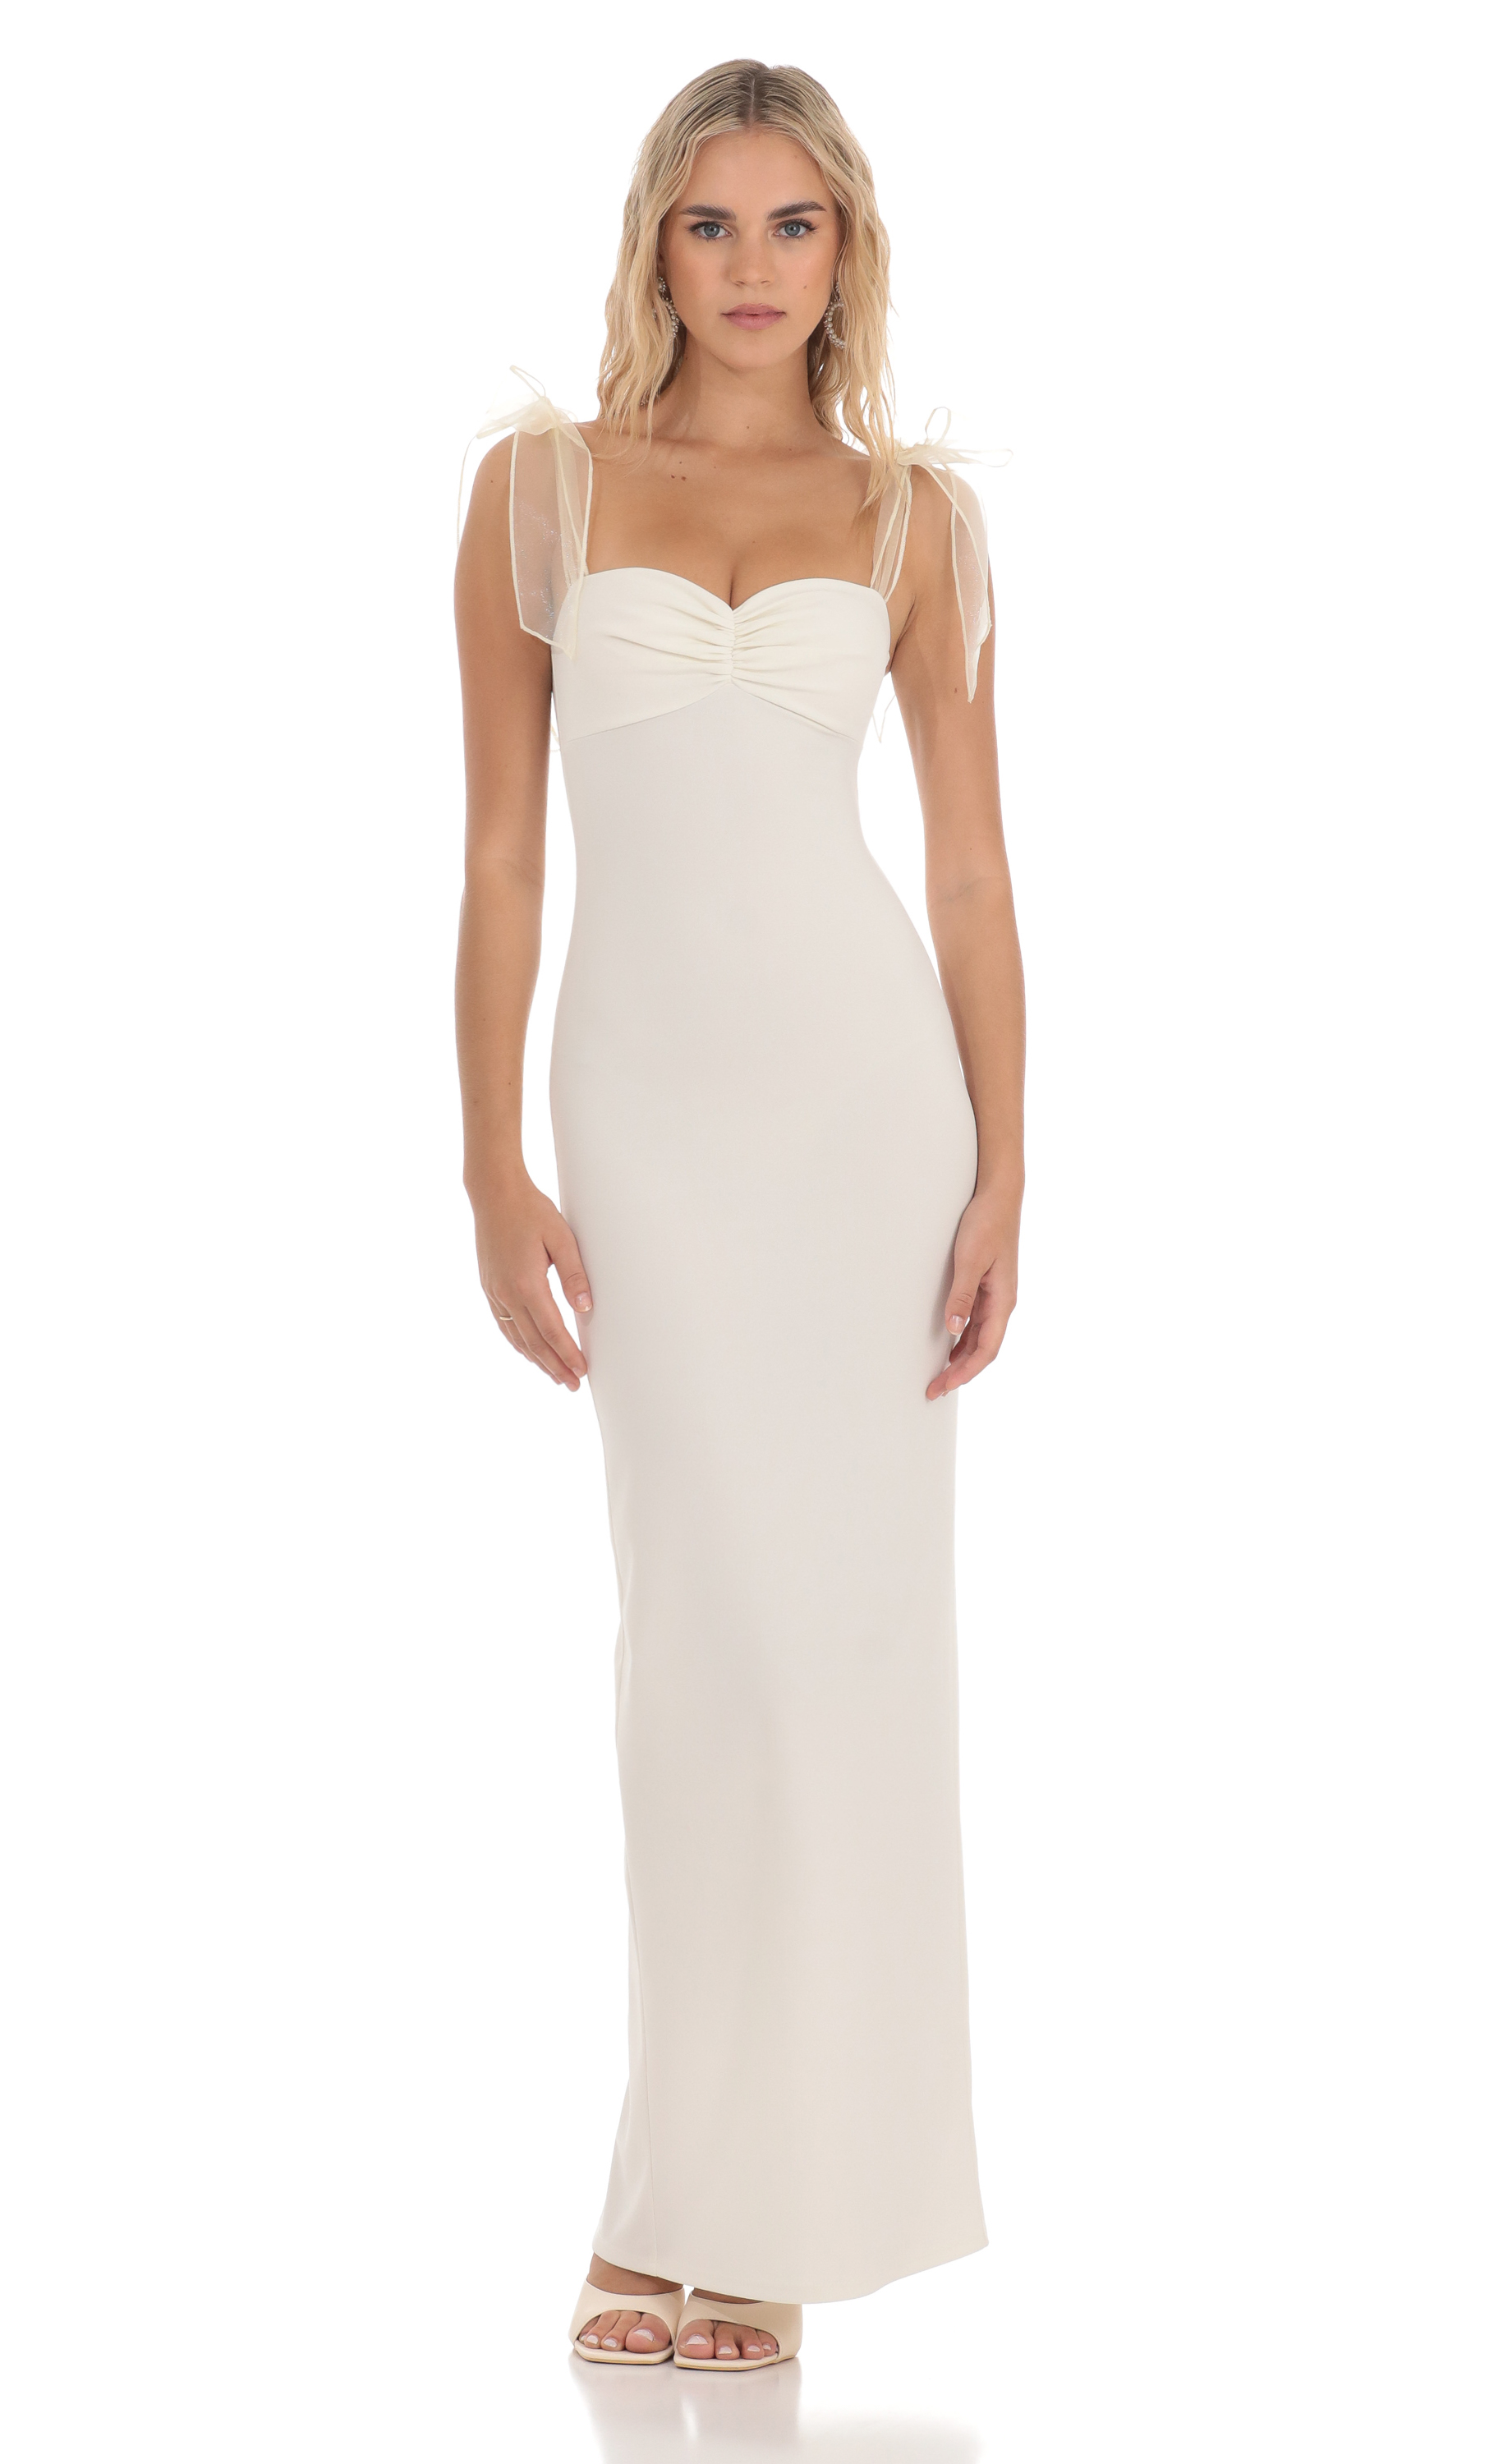 Shoulder Ties Maxi Dress in White